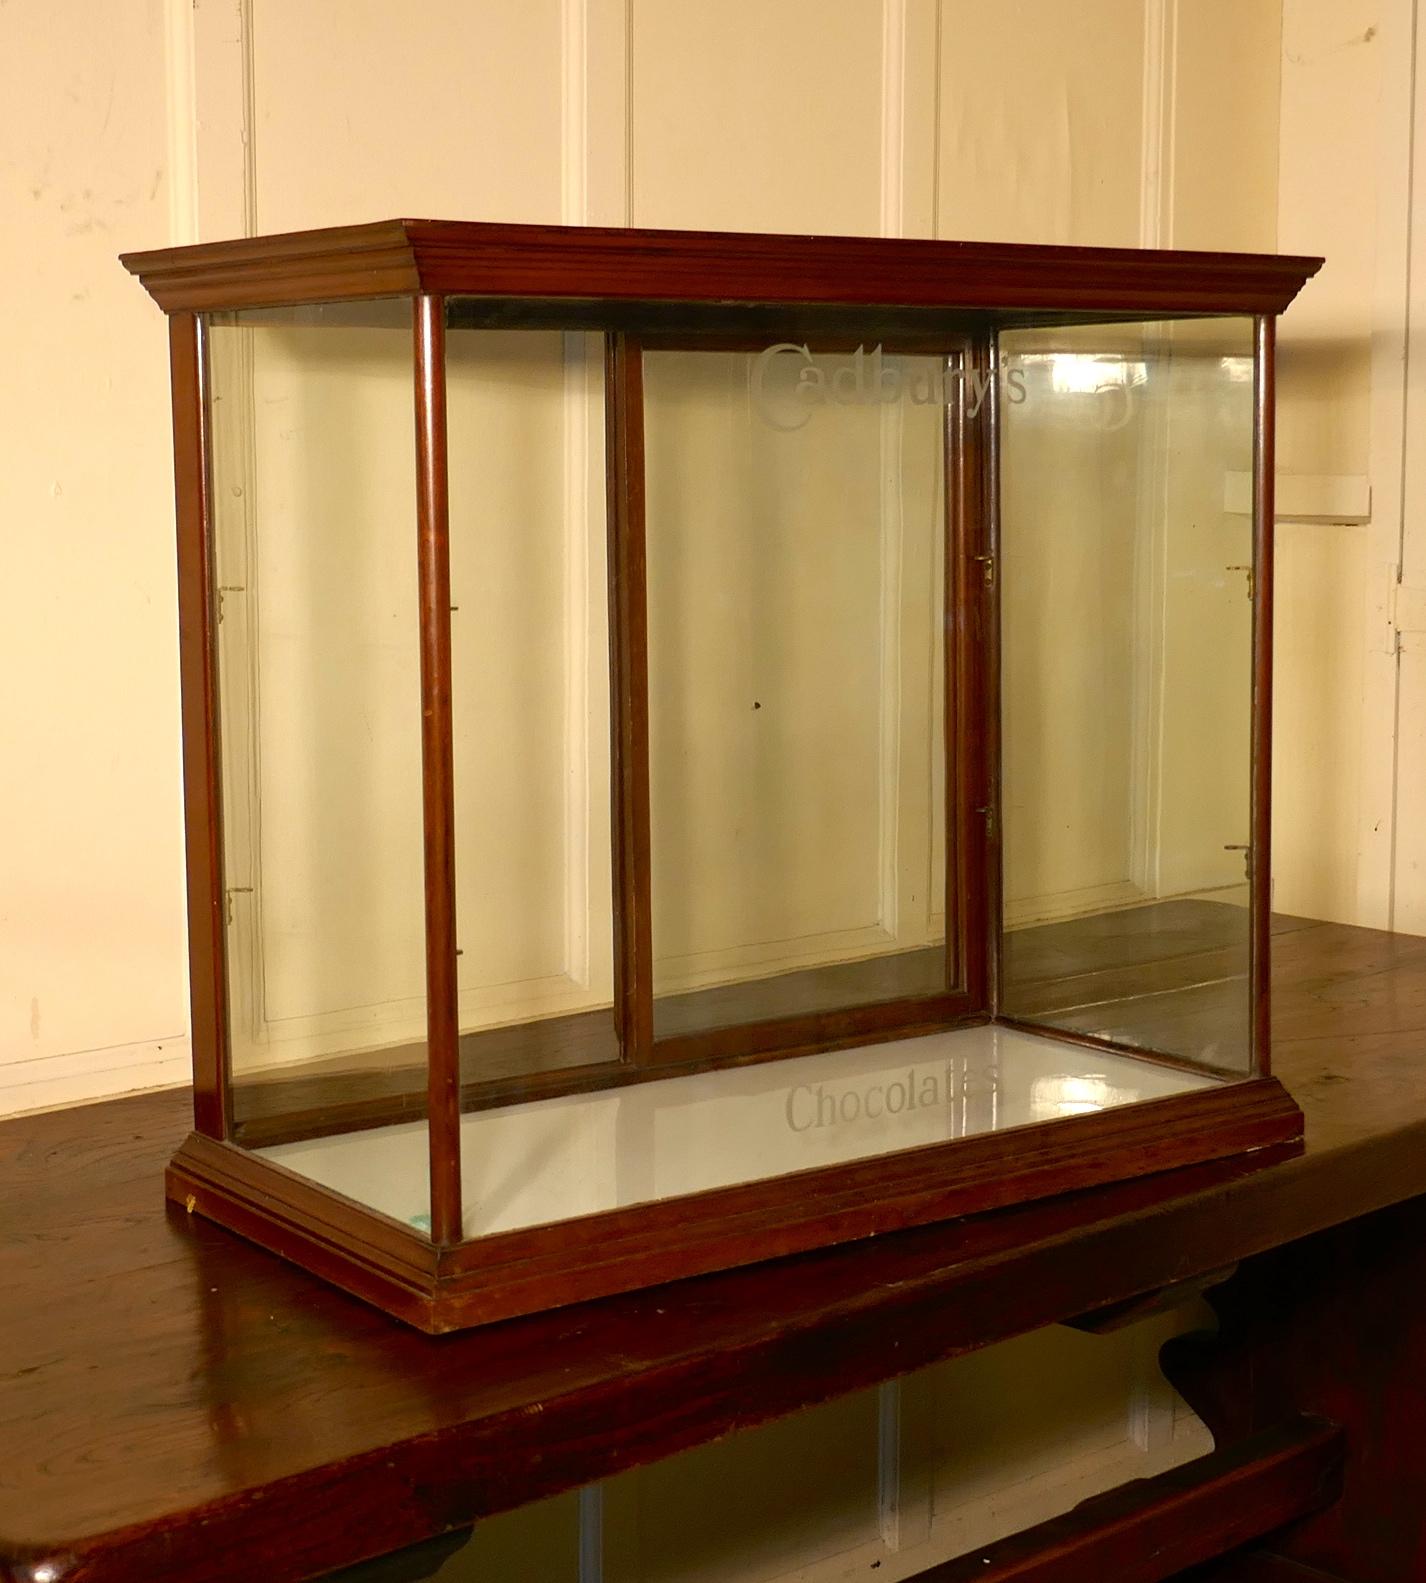 Edwardian Cadbury’s Counter Top Sweet Shop Display Cabinet For Sale 1